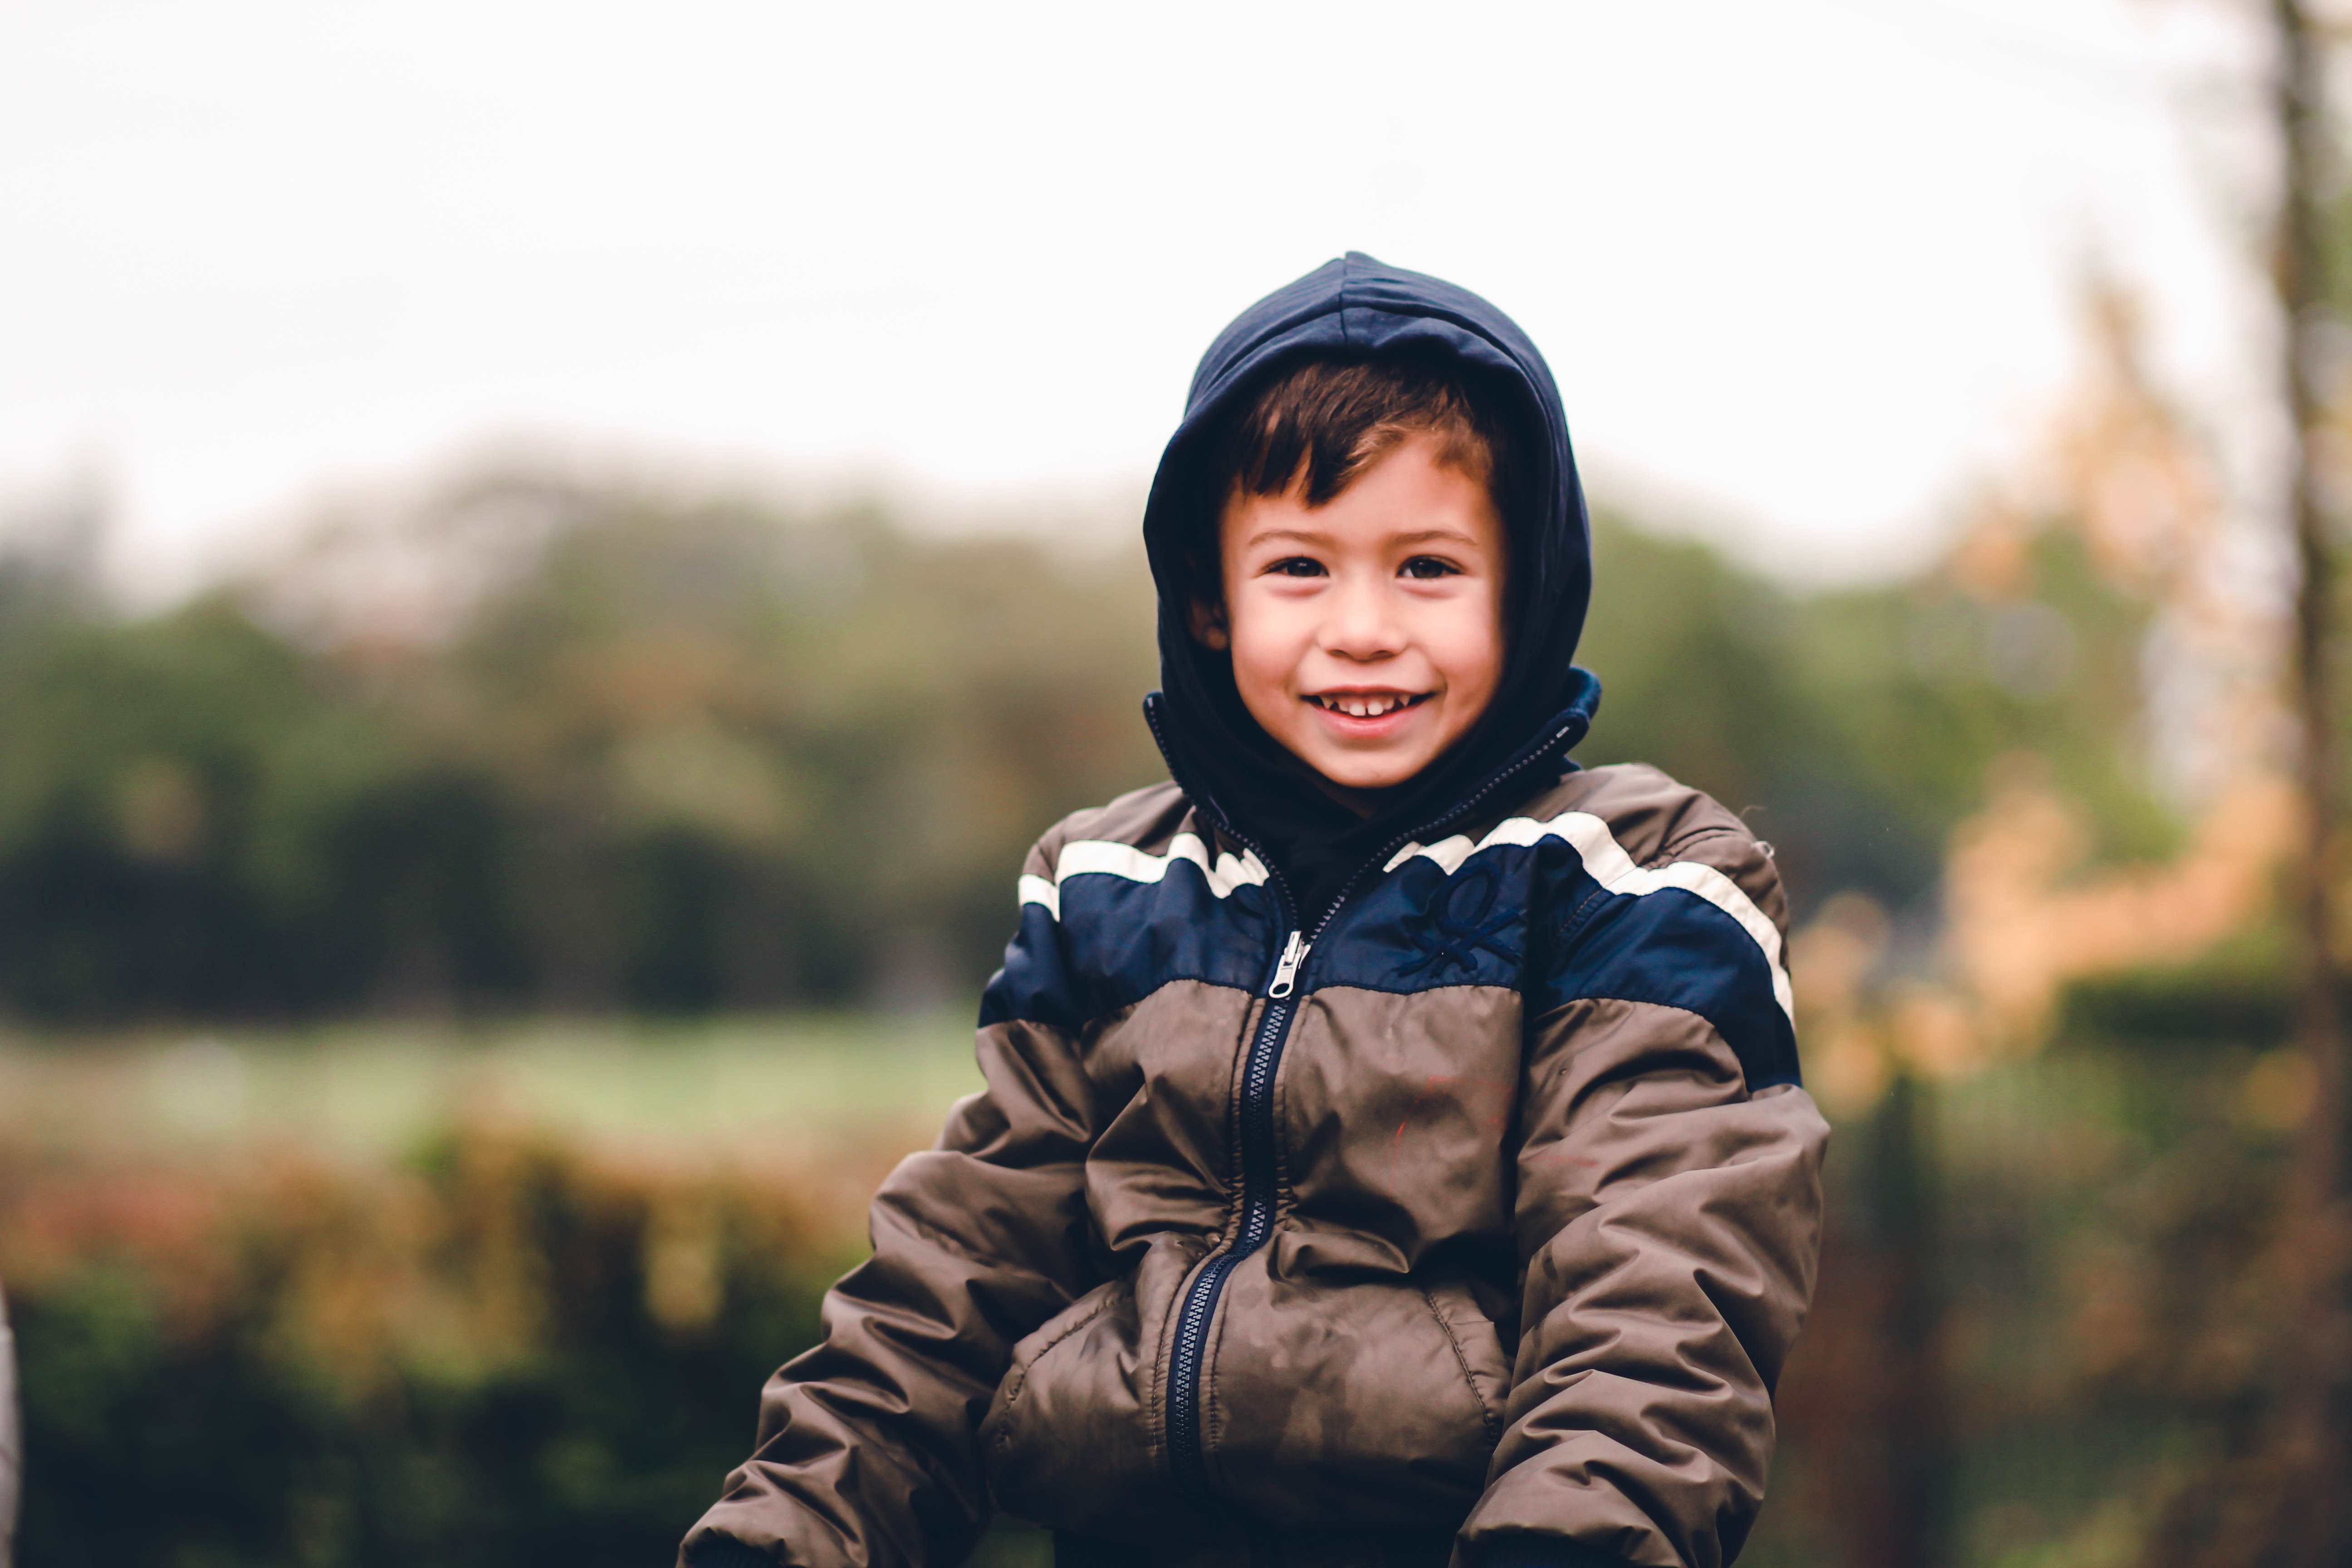 Daniel was a young and cheerful boy | Photo: Pexels